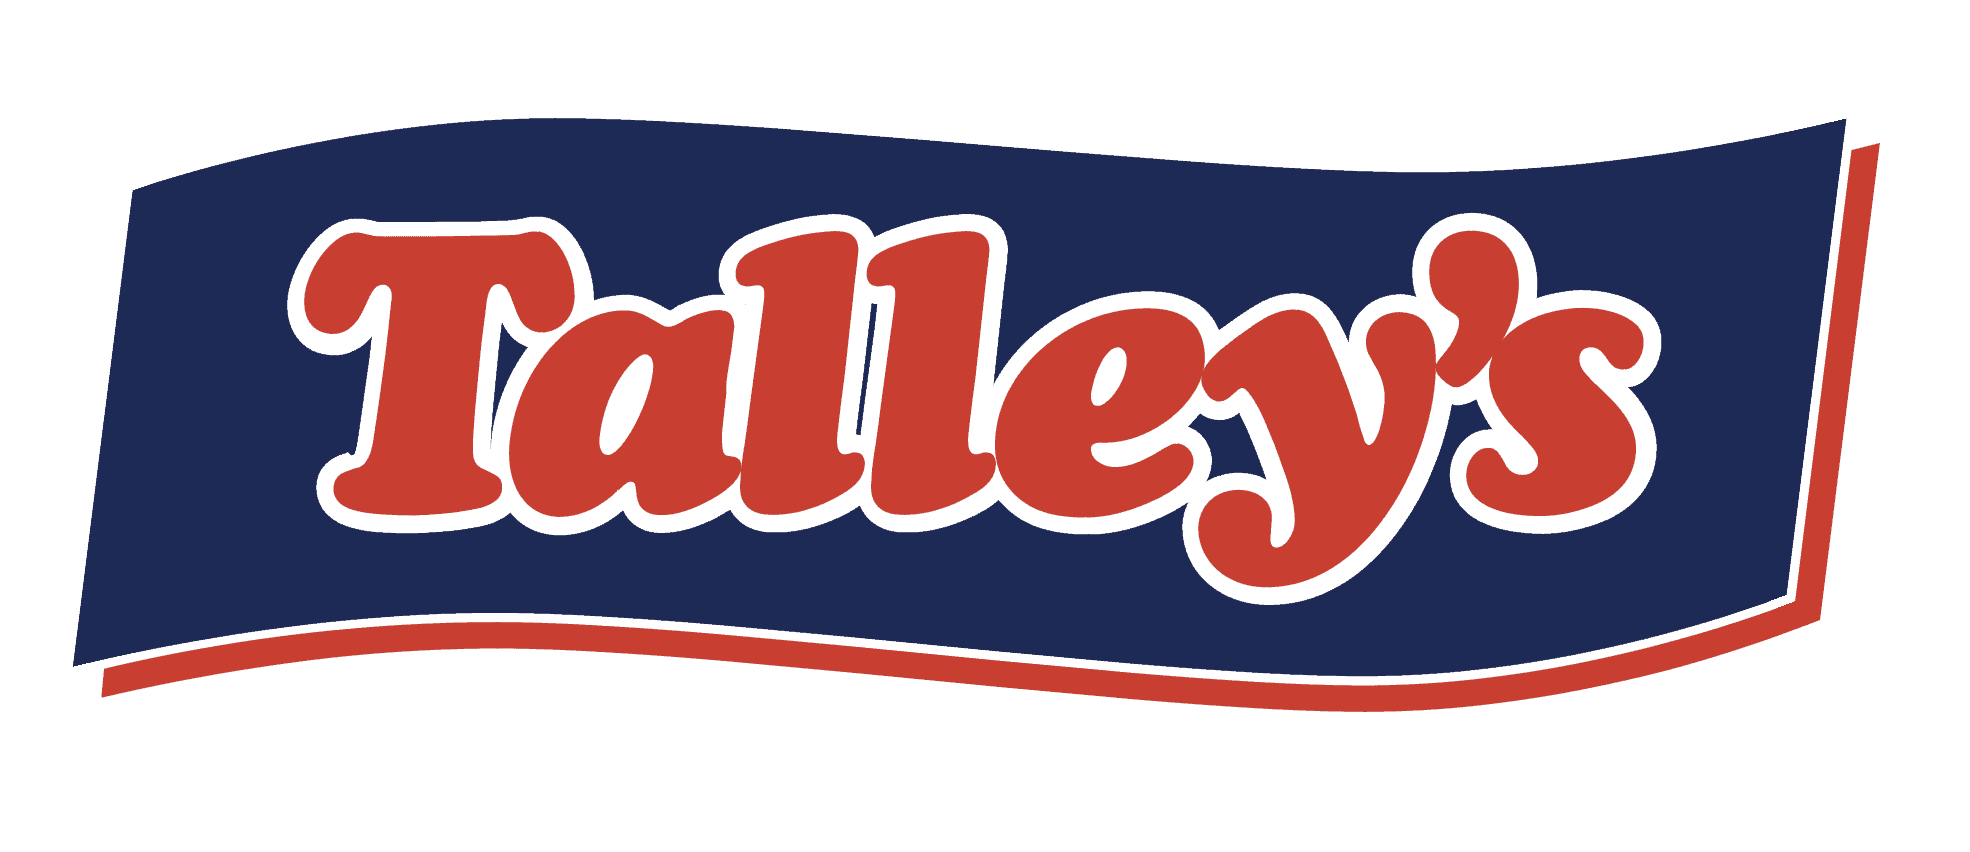 https://tunaaustralia.org.au/wp-content/uploads/2021/03/Talleys.png